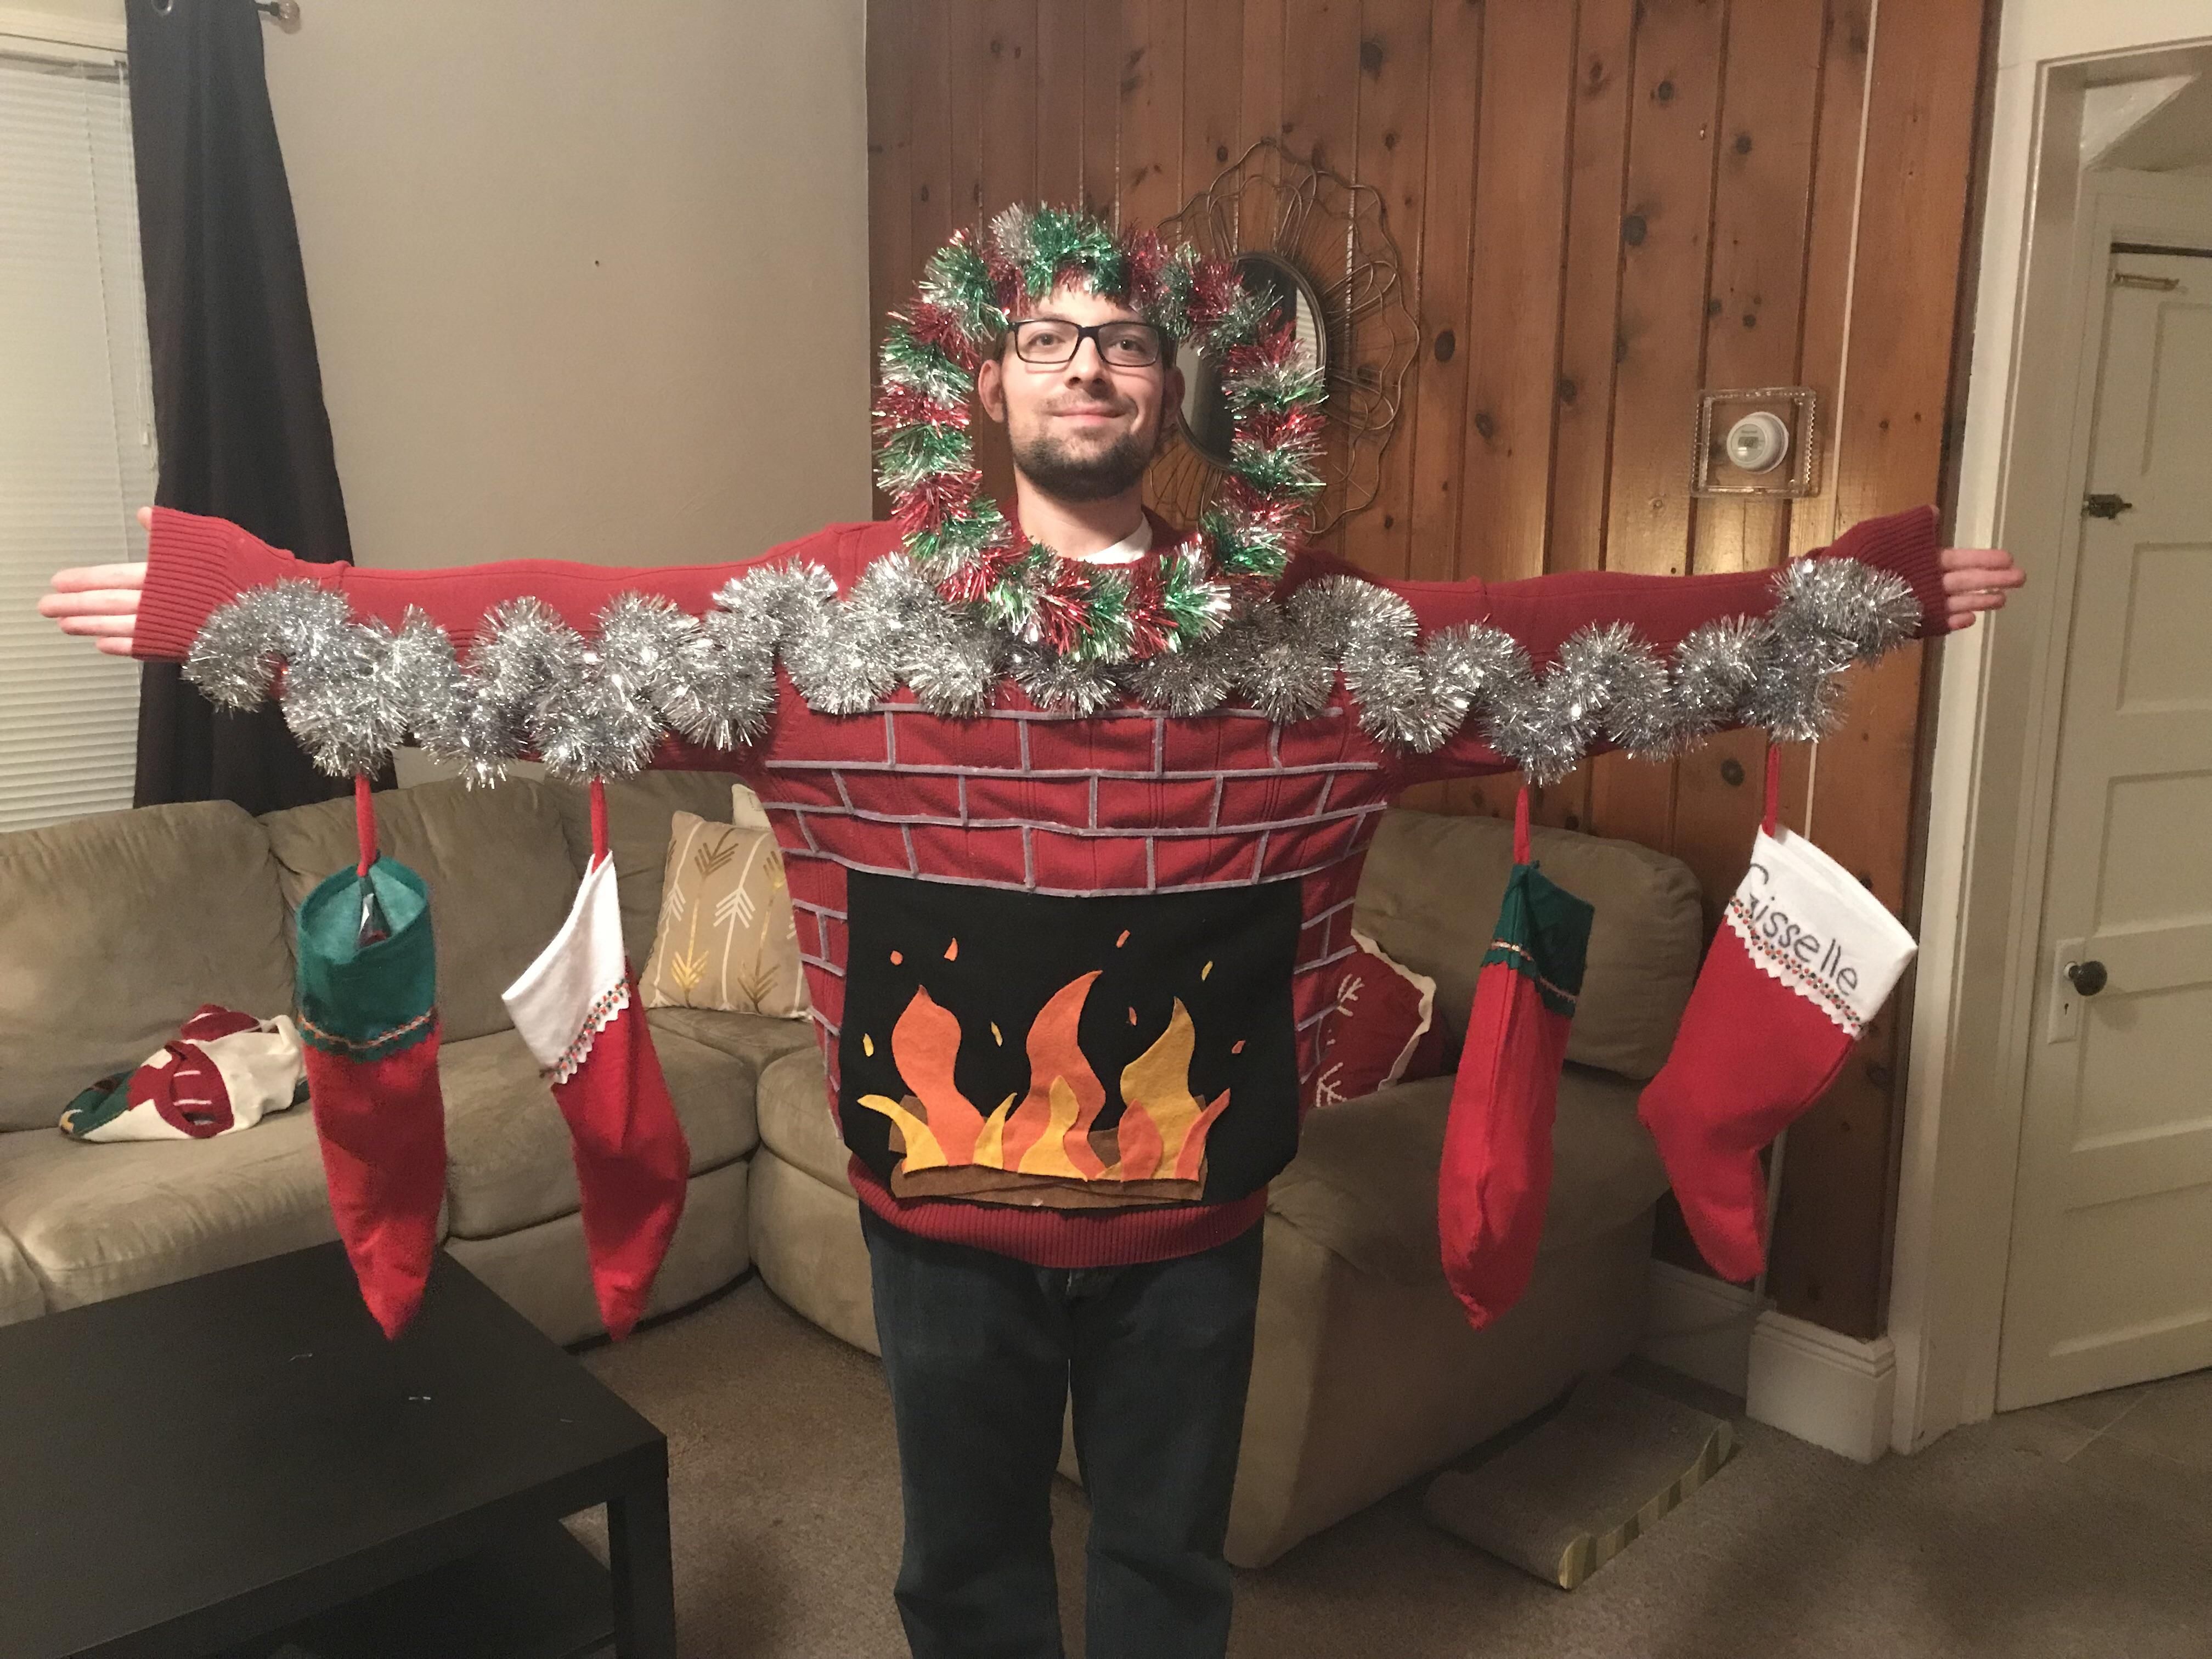 My friend just won 100 for his workplace’s Ugly Sweater Contest.